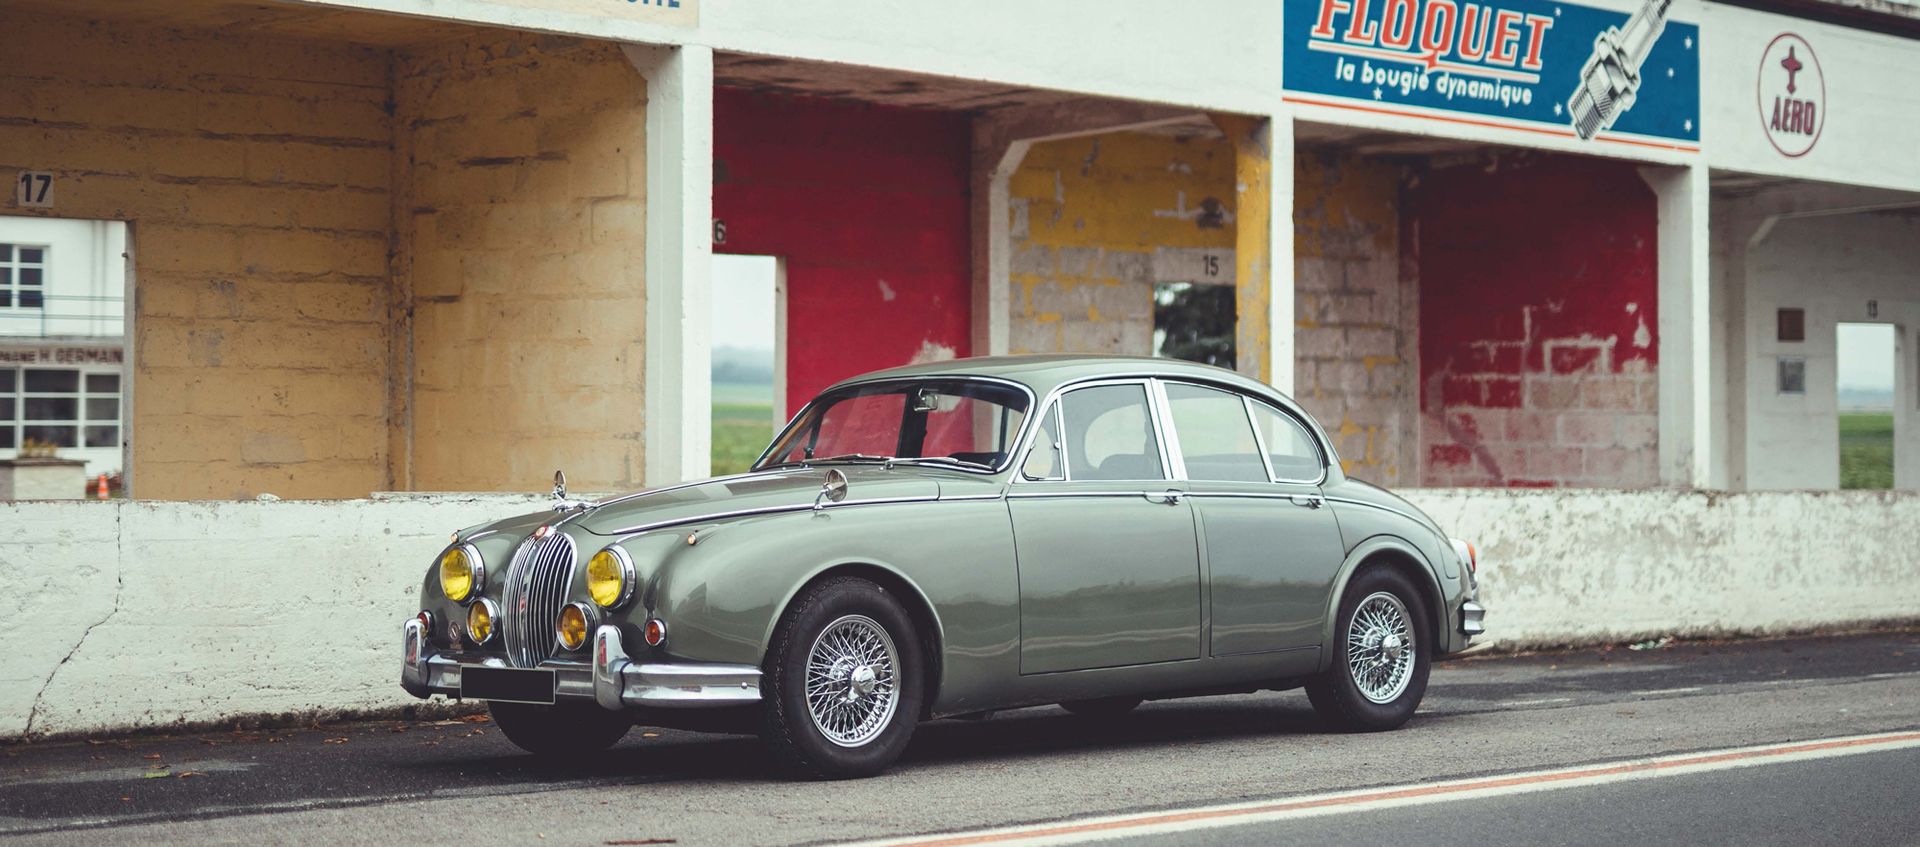 1960 JAGUAR MK II 3.8 
Same owner for 17 years

Exceptional performance and beha&hellip;